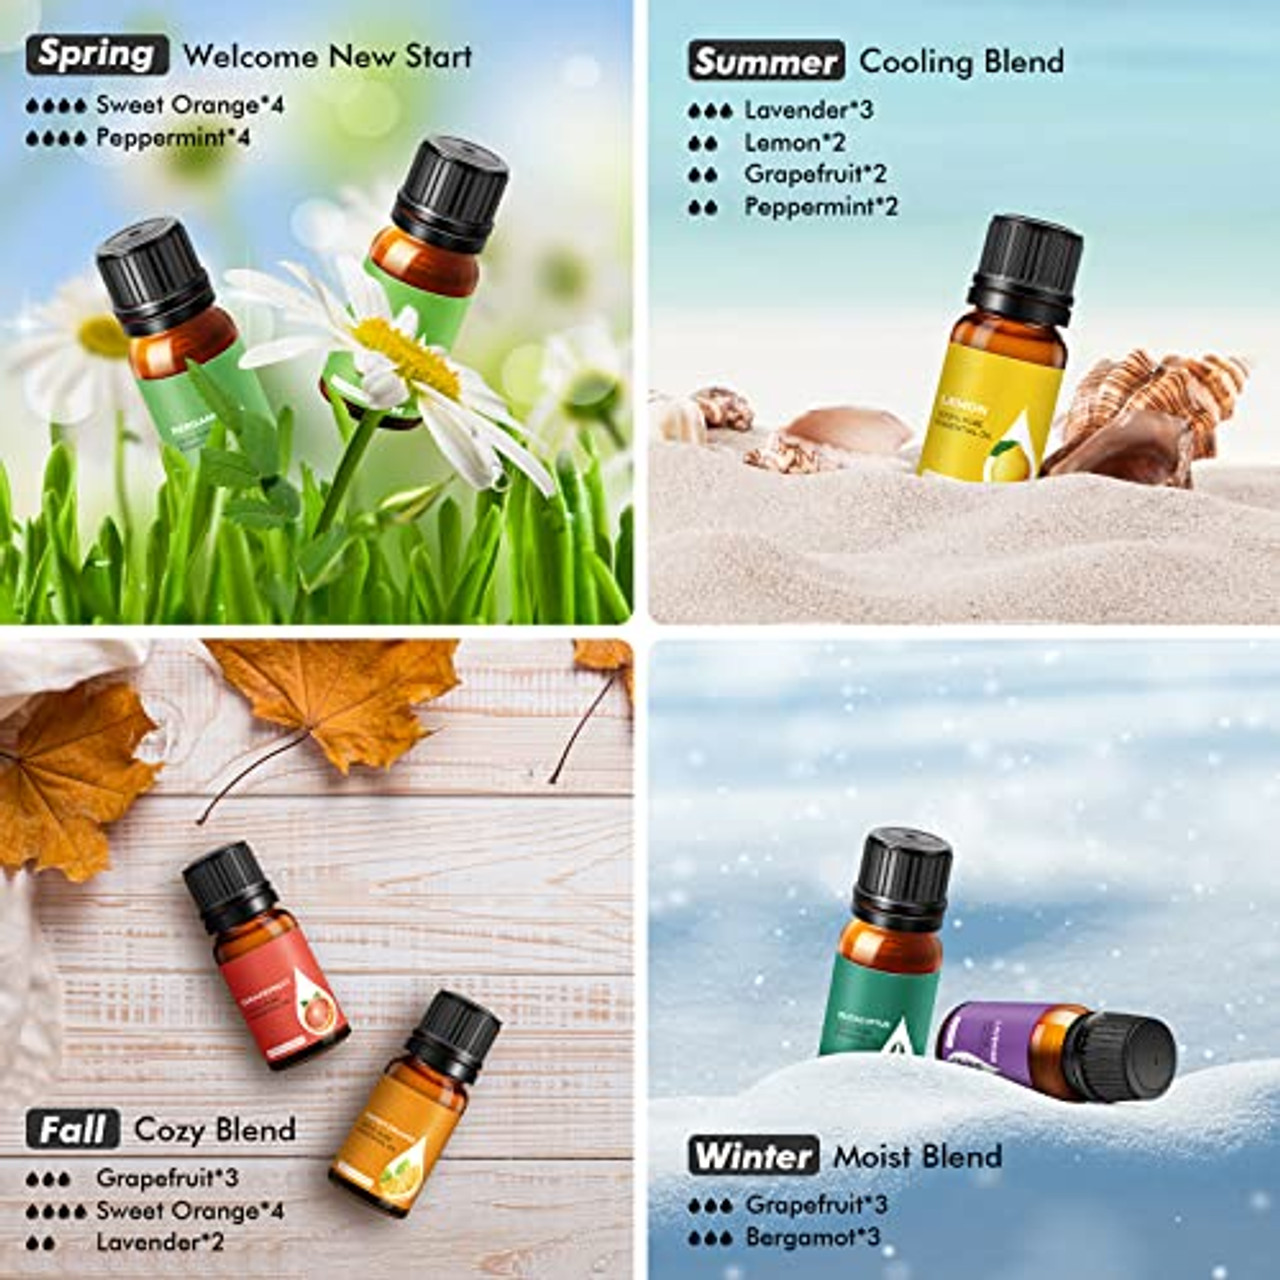 Essential Oils Top 10 Gift Set, Top 16 Oils Gfit Set for Diffuser,  Humidifier, Massage, Aromatherapy, Skin & Hair Care